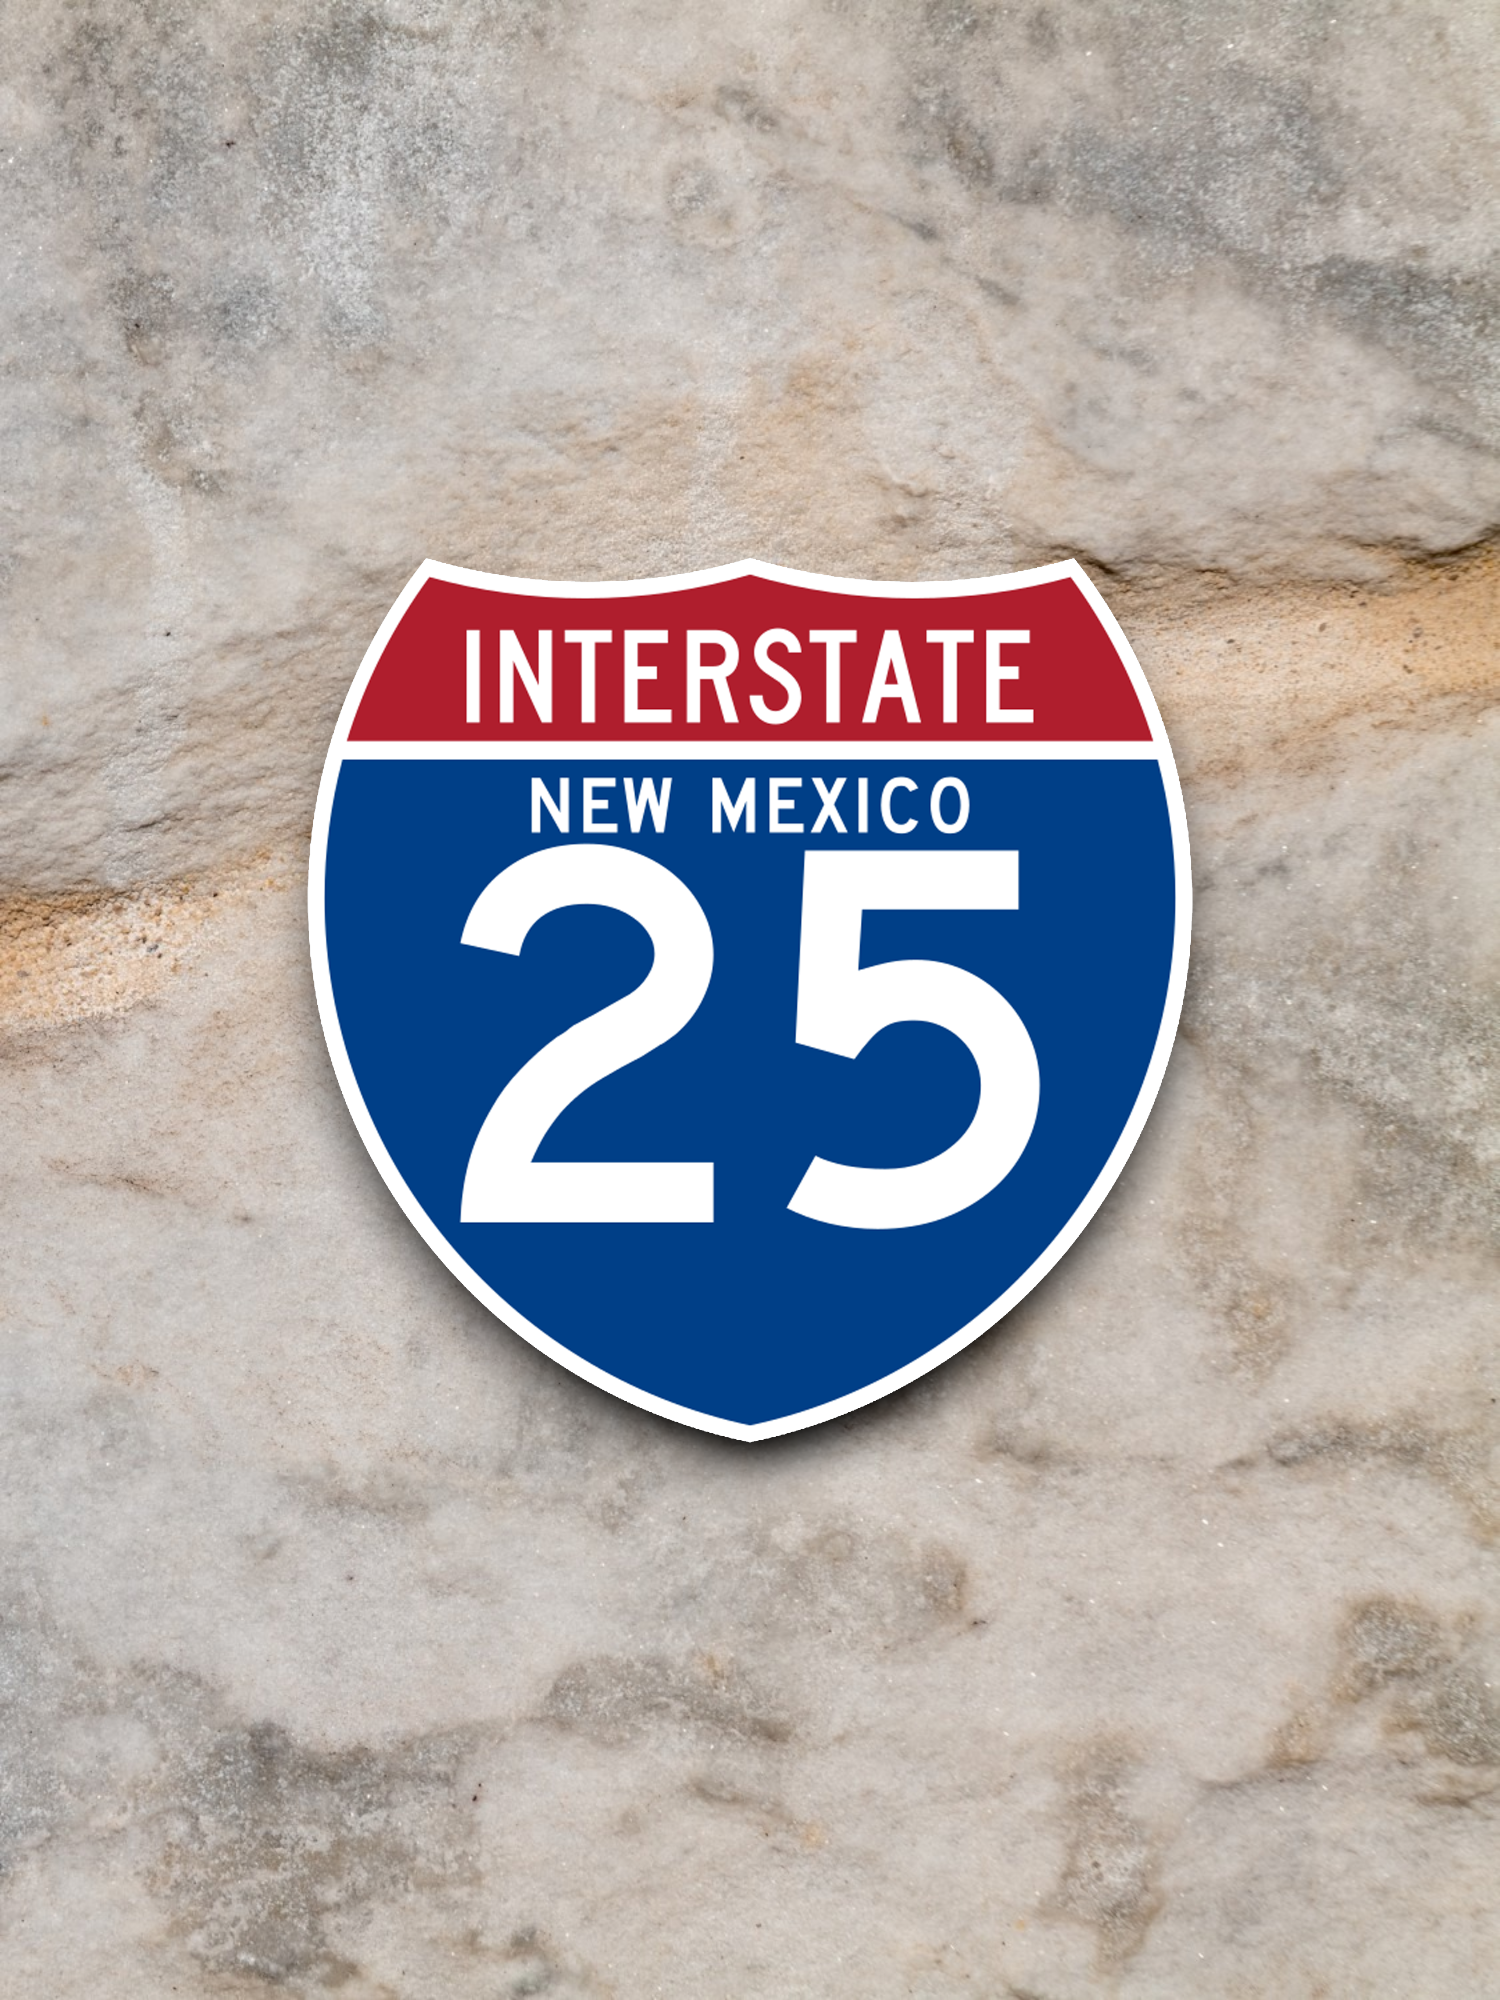 Interstate I-25 New Mexico - Road Sign Sticker